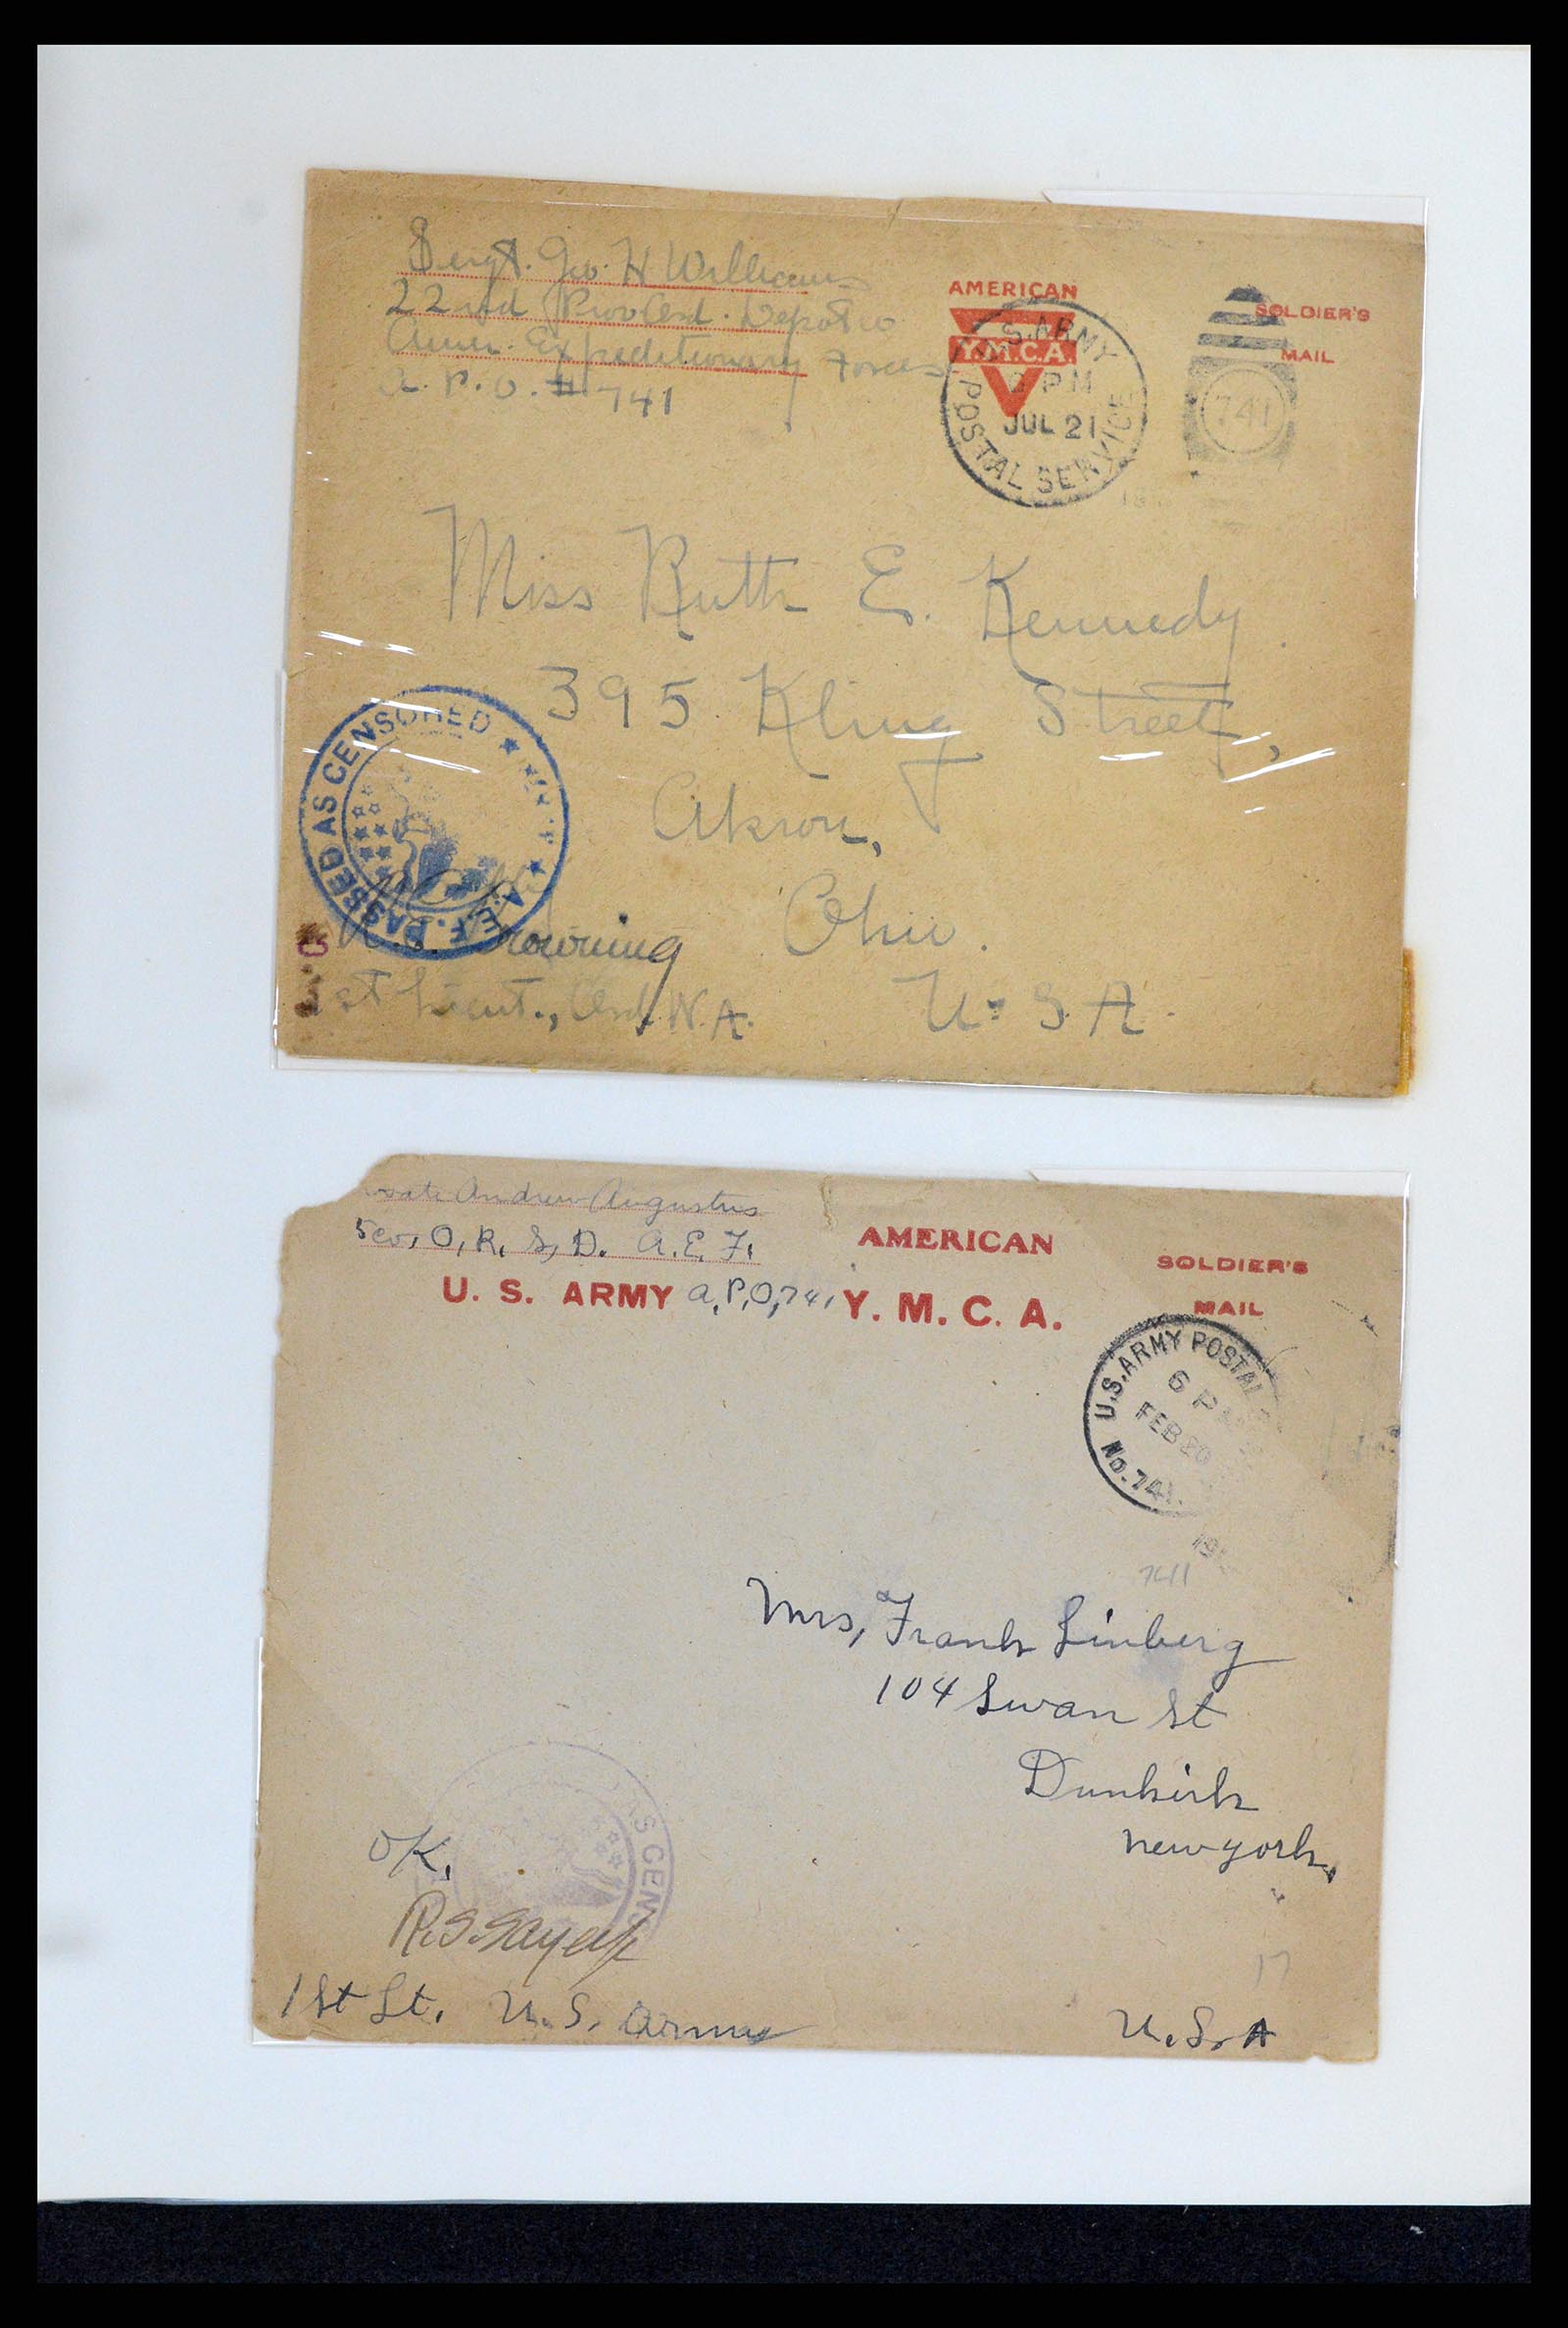 37718 095 - Stamp collection 37718 USA military covers 1914-1970.